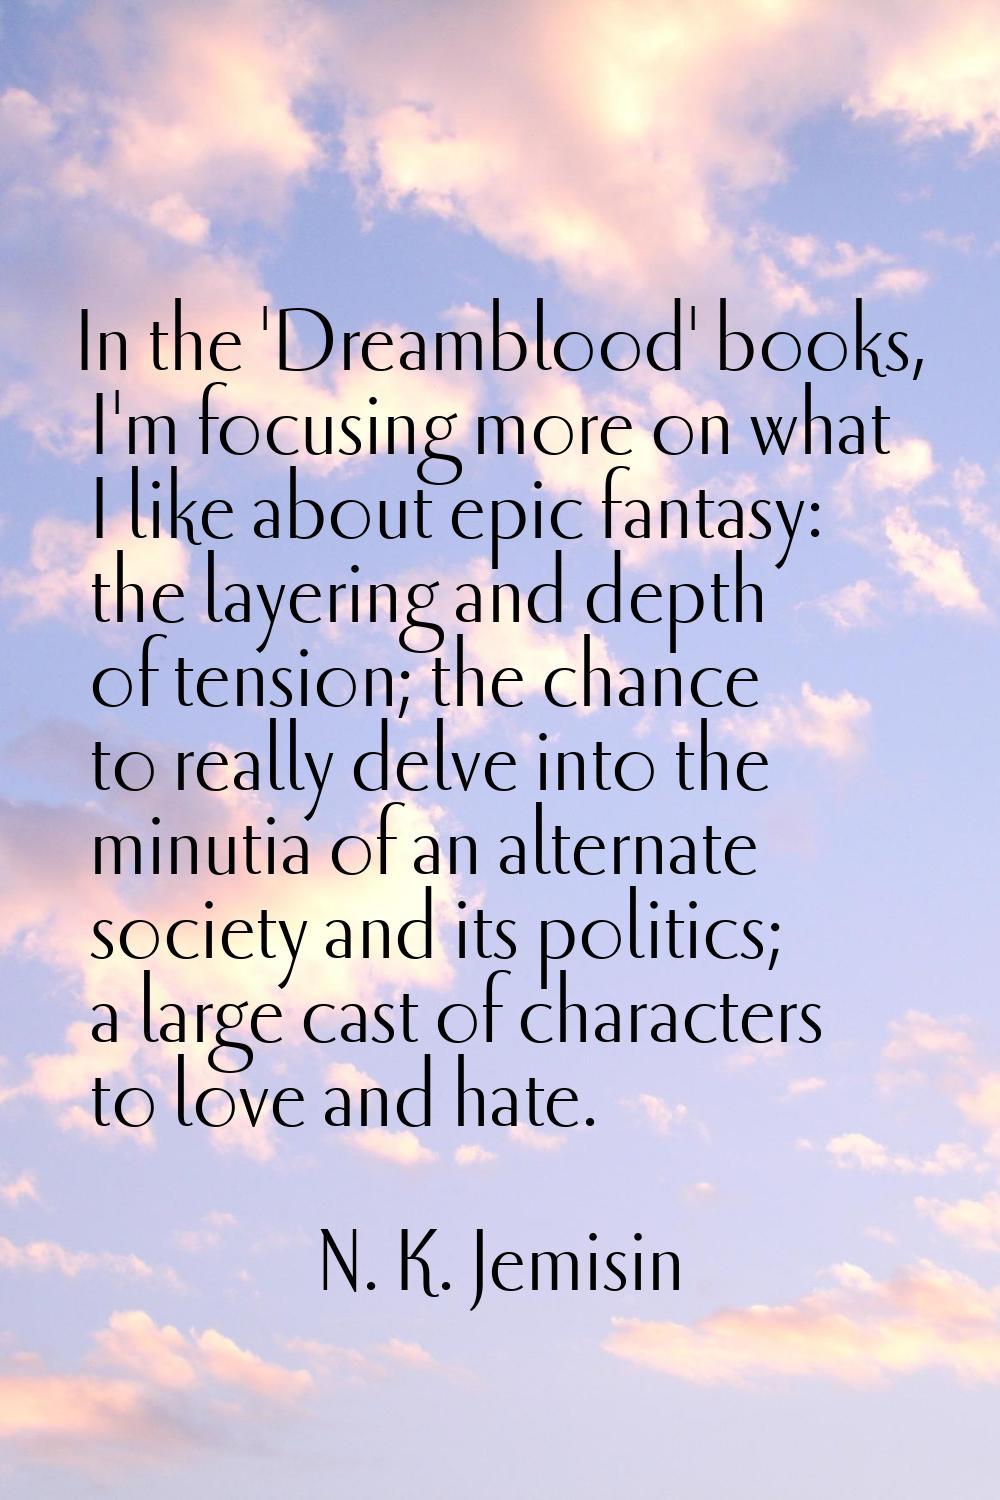 In the 'Dreamblood' books, I'm focusing more on what I like about epic fantasy: the layering and de